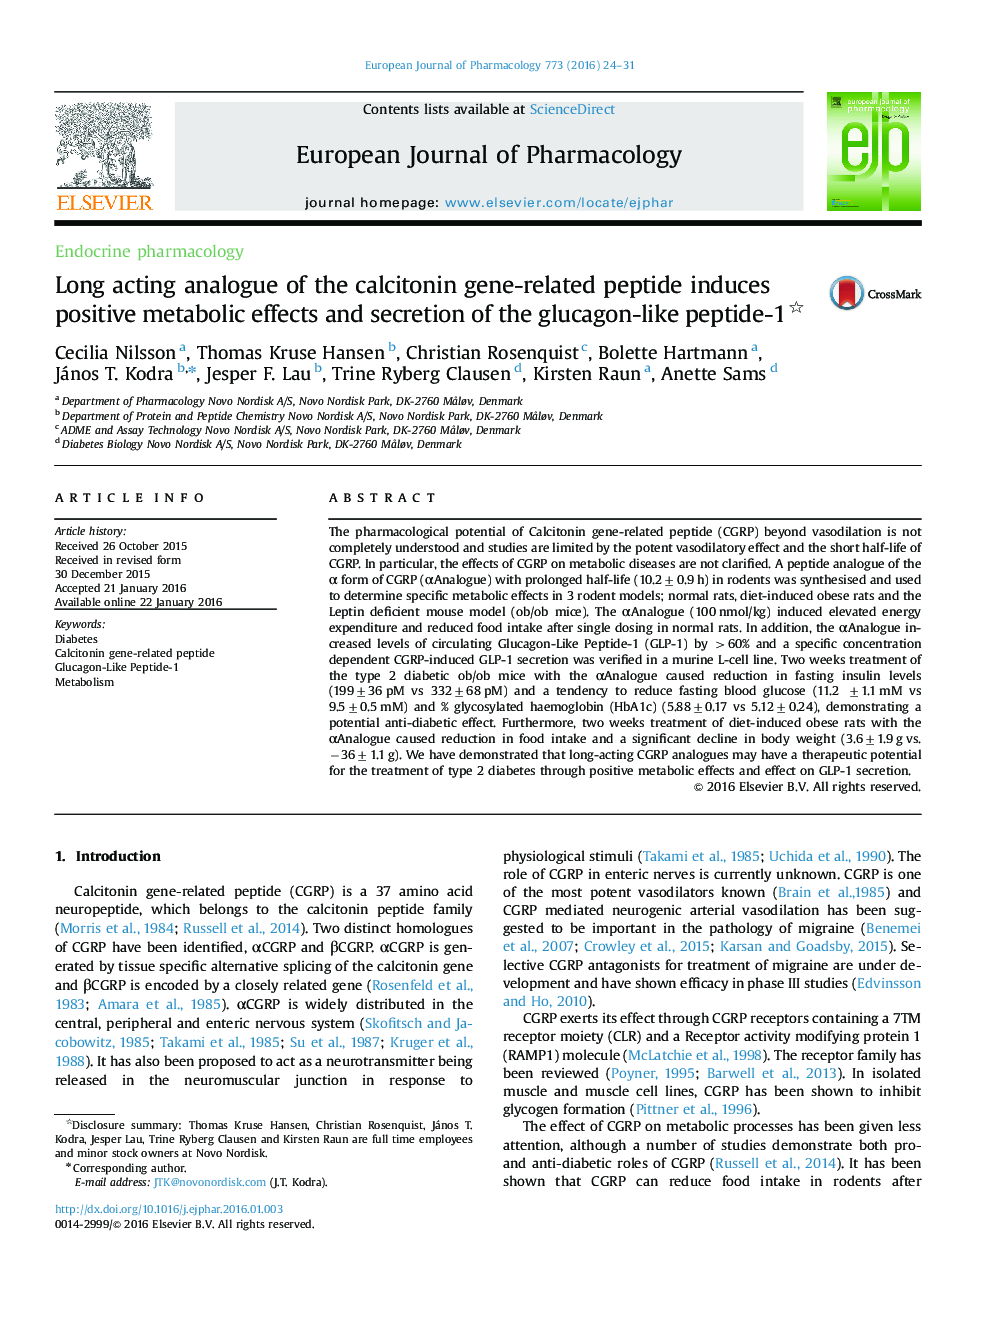 Long acting analogue of the calcitonin gene-related peptide induces positive metabolic effects and secretion of the glucagon-like peptide-1 